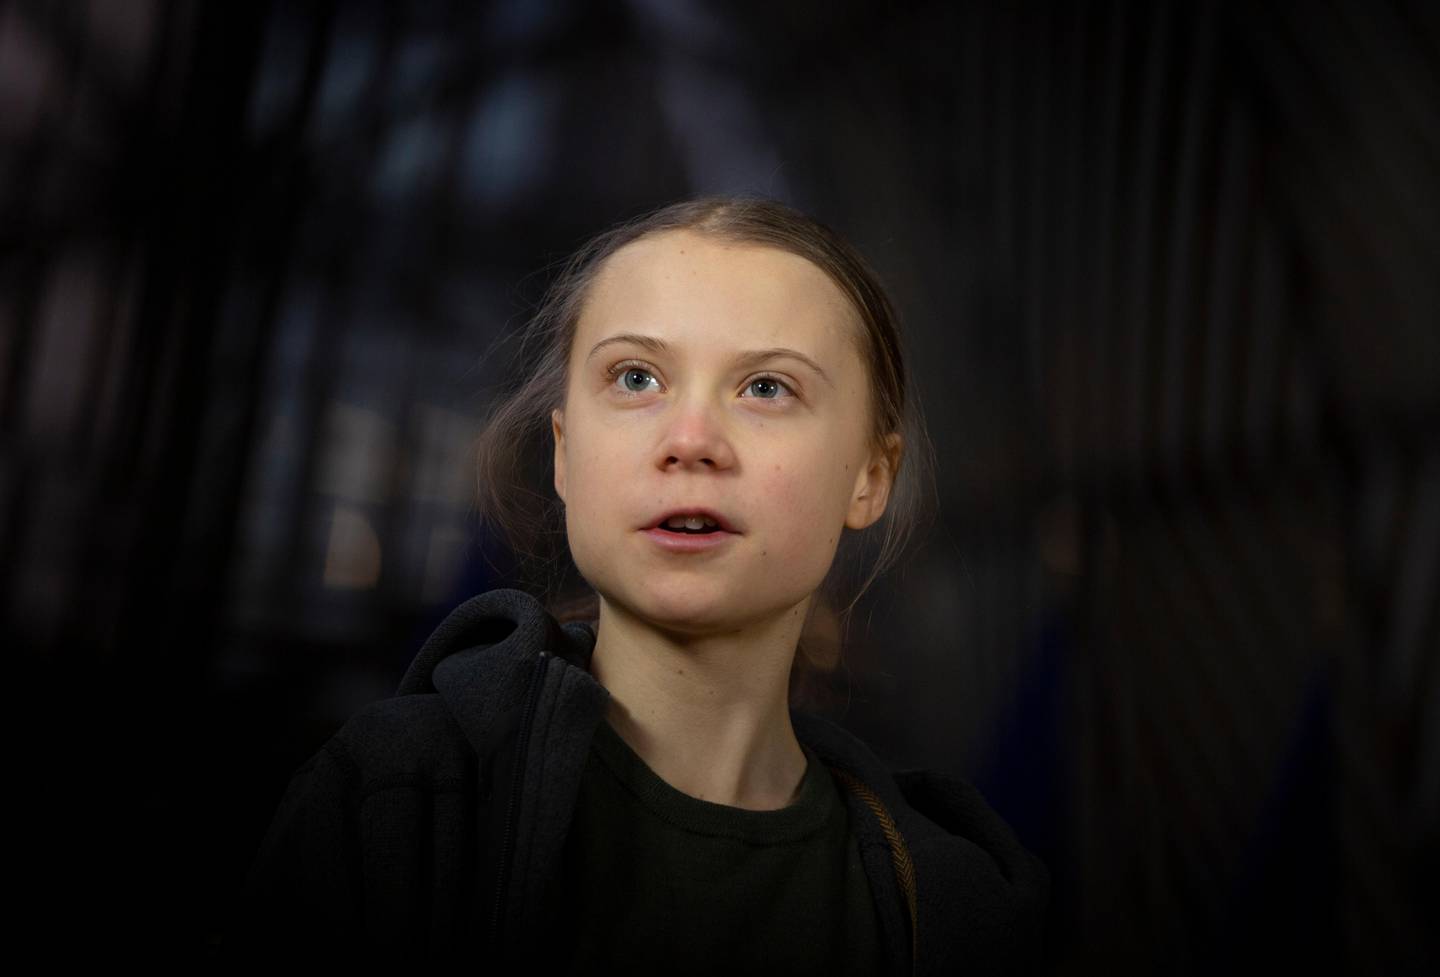 Swedish climate activist Greta Thunberg speaks with the media as she arrives for a meeting of the Environment Council at the European Council building in Brussels, Thursday, March 5, 2020. (AP Photo/Virginia Mayo)